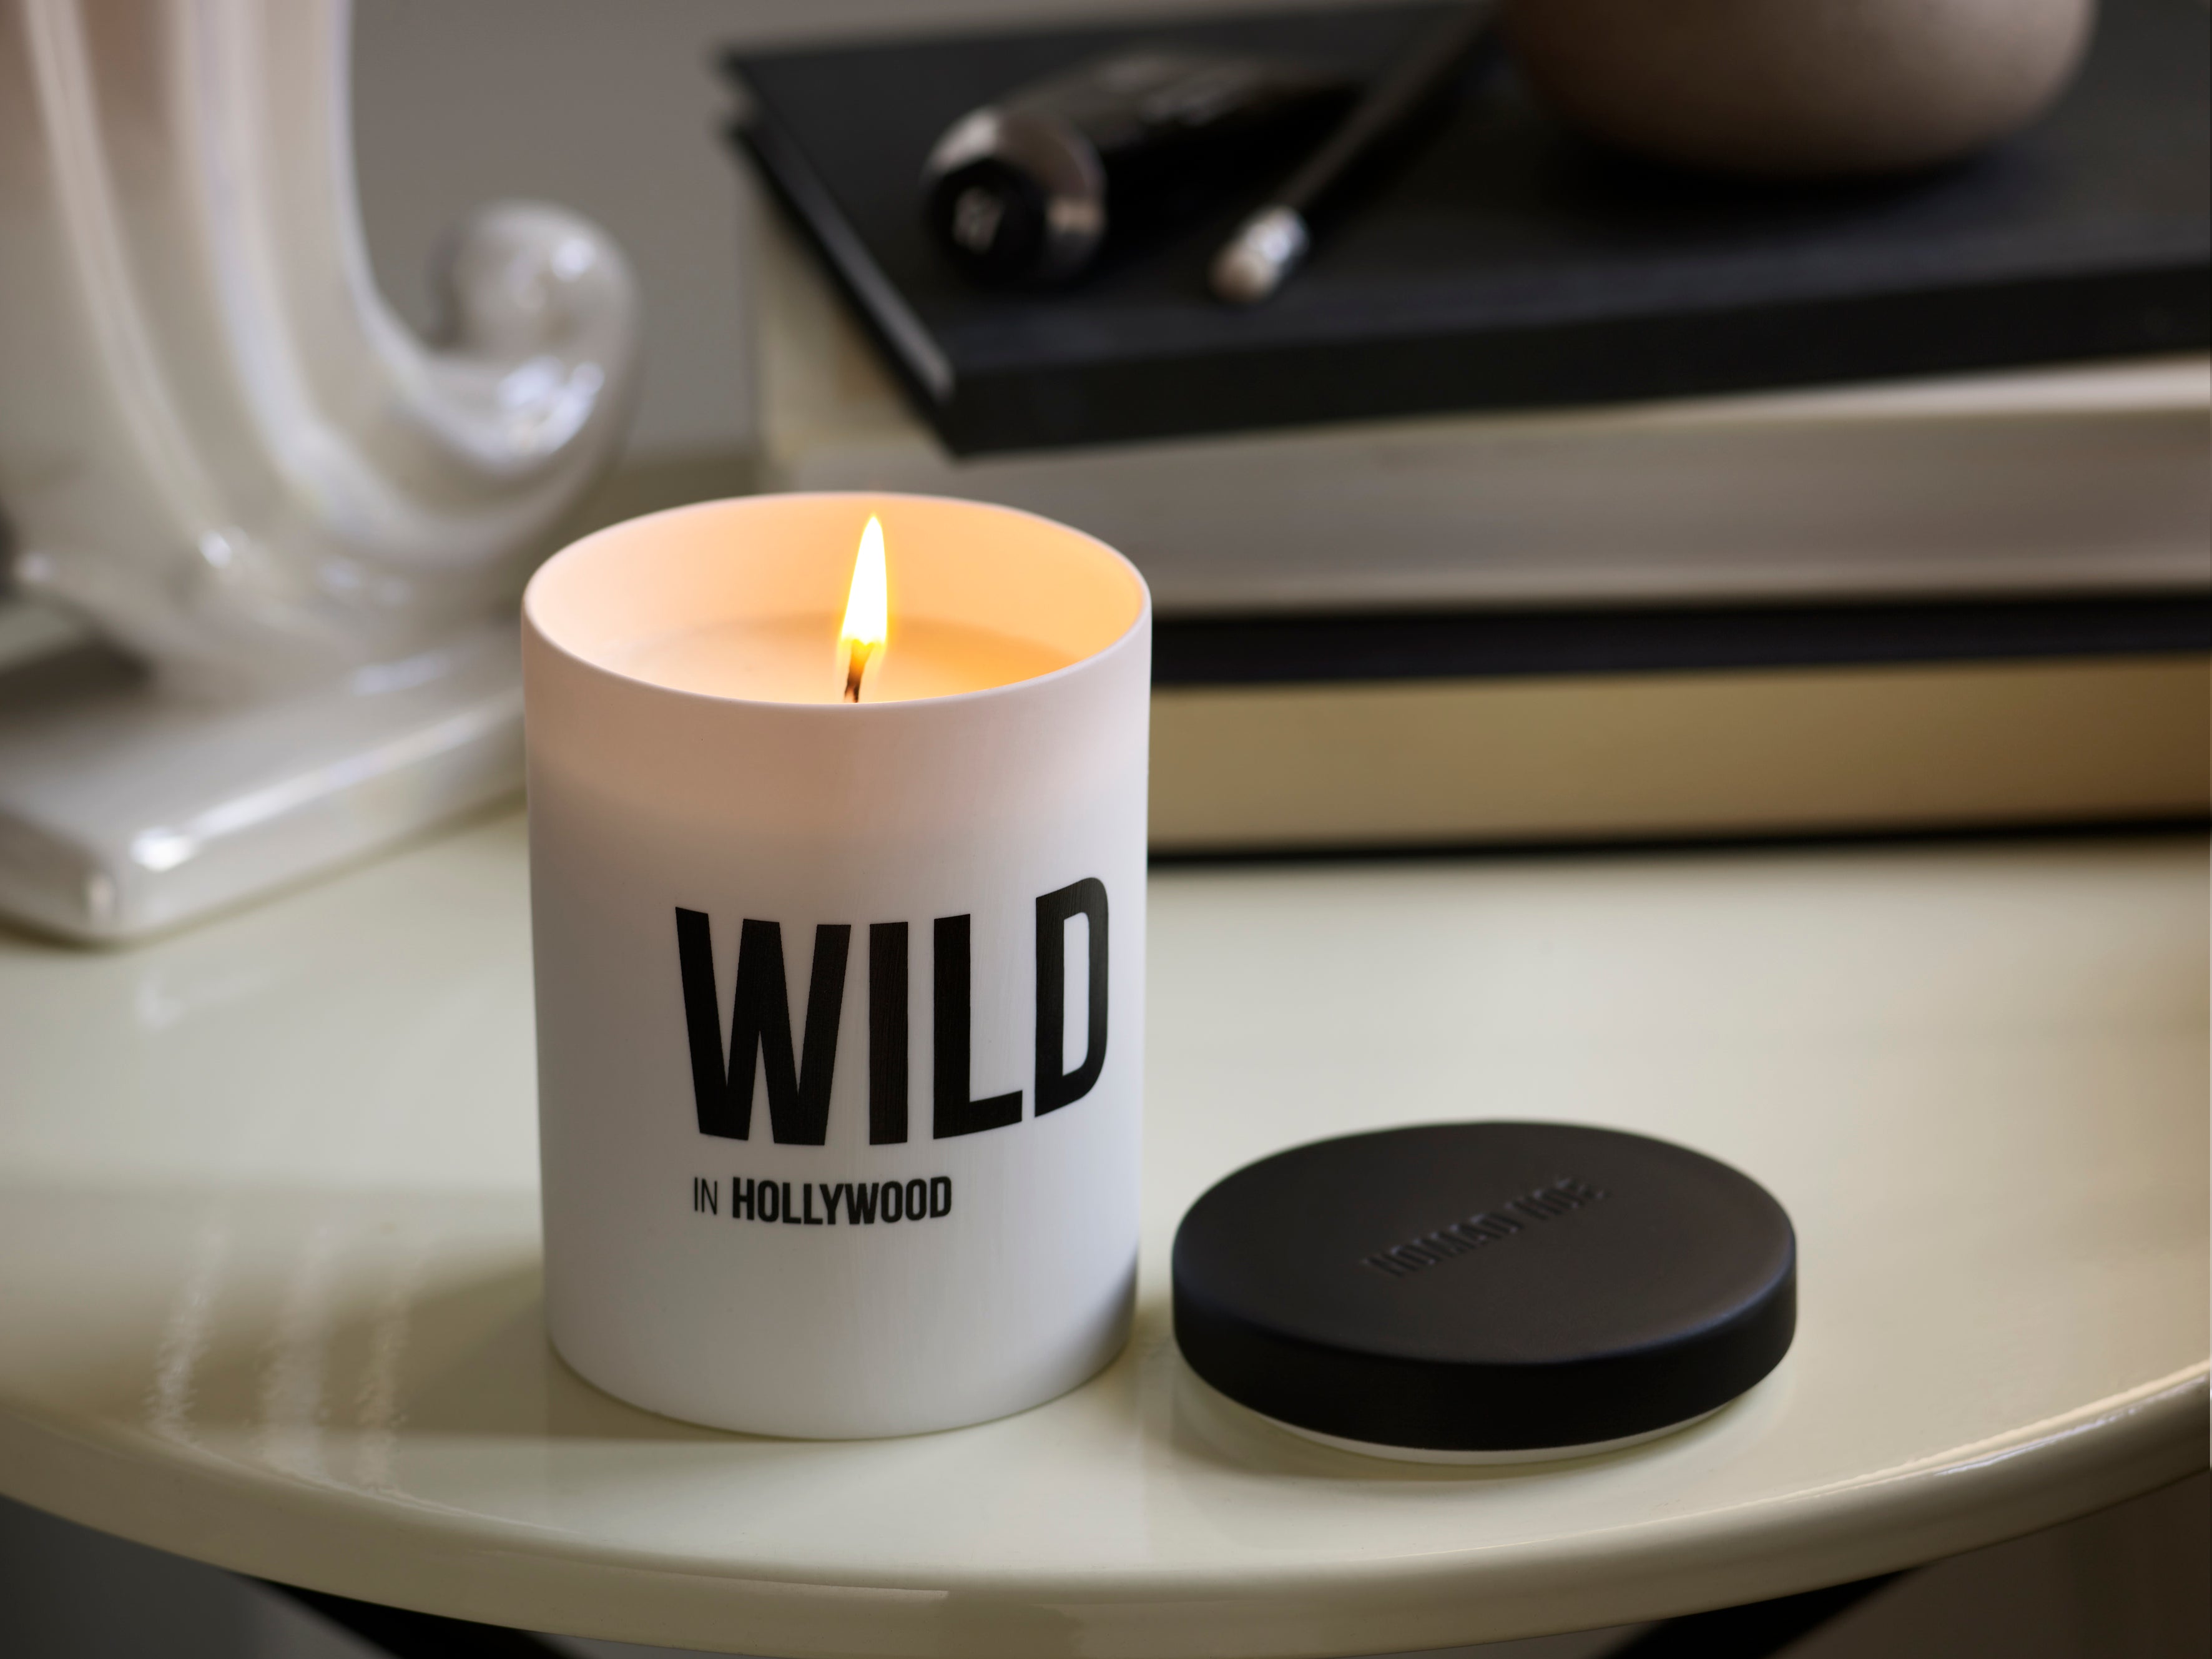 Wild in Hollywood luxury scented candle Nomad Noé